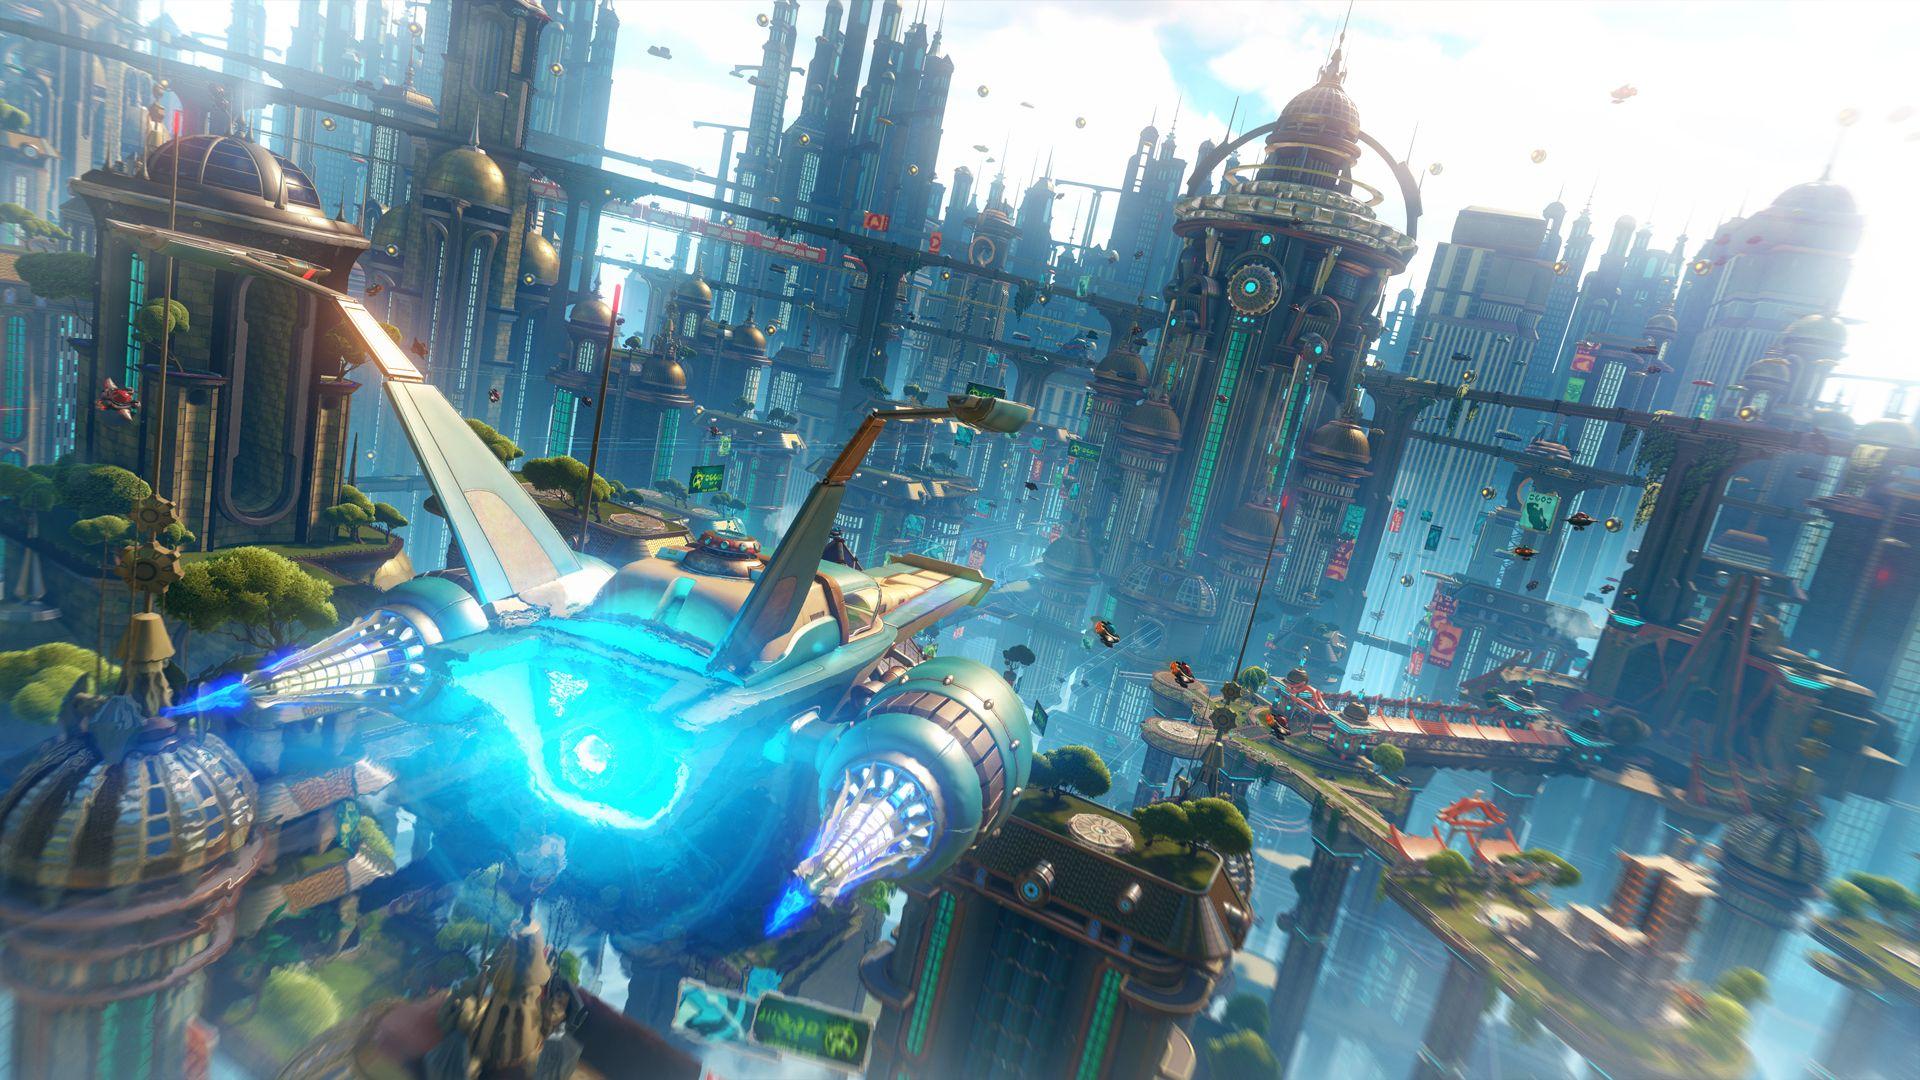 Ratchet & Clank 2016 Most Successful Insomniac Game Ever, Confirms